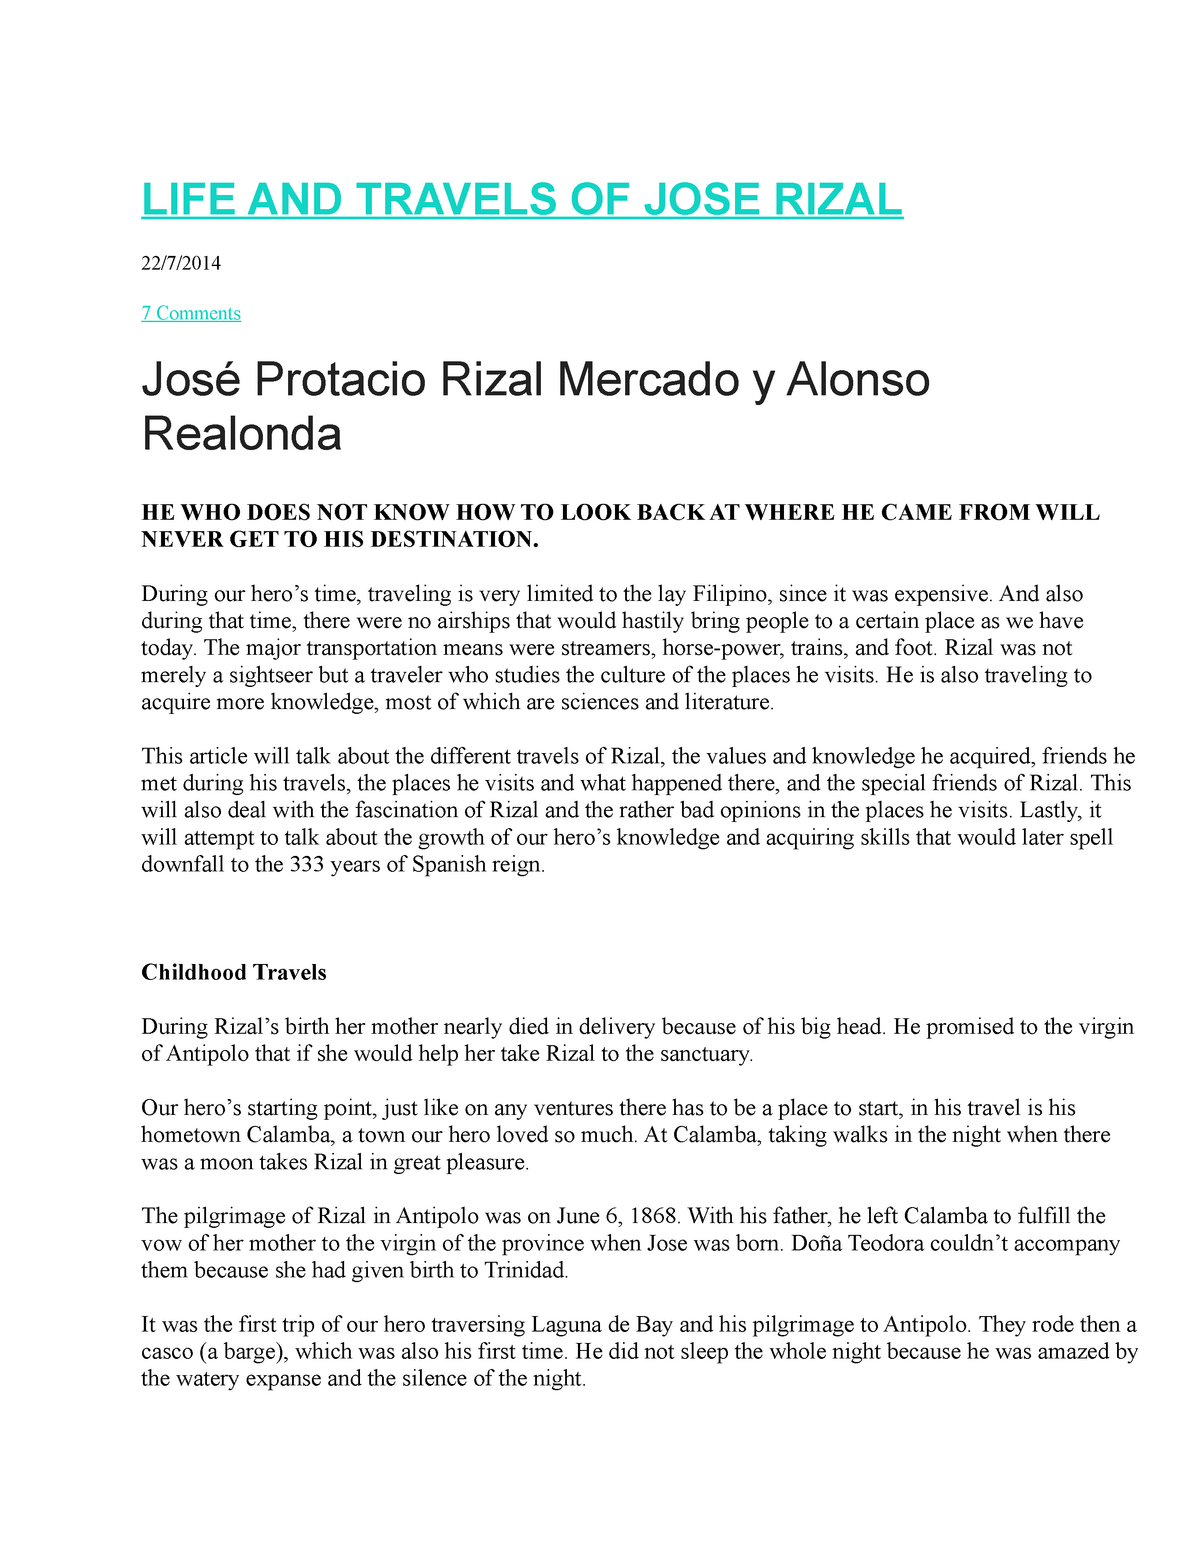 jose rizal travels and adventures